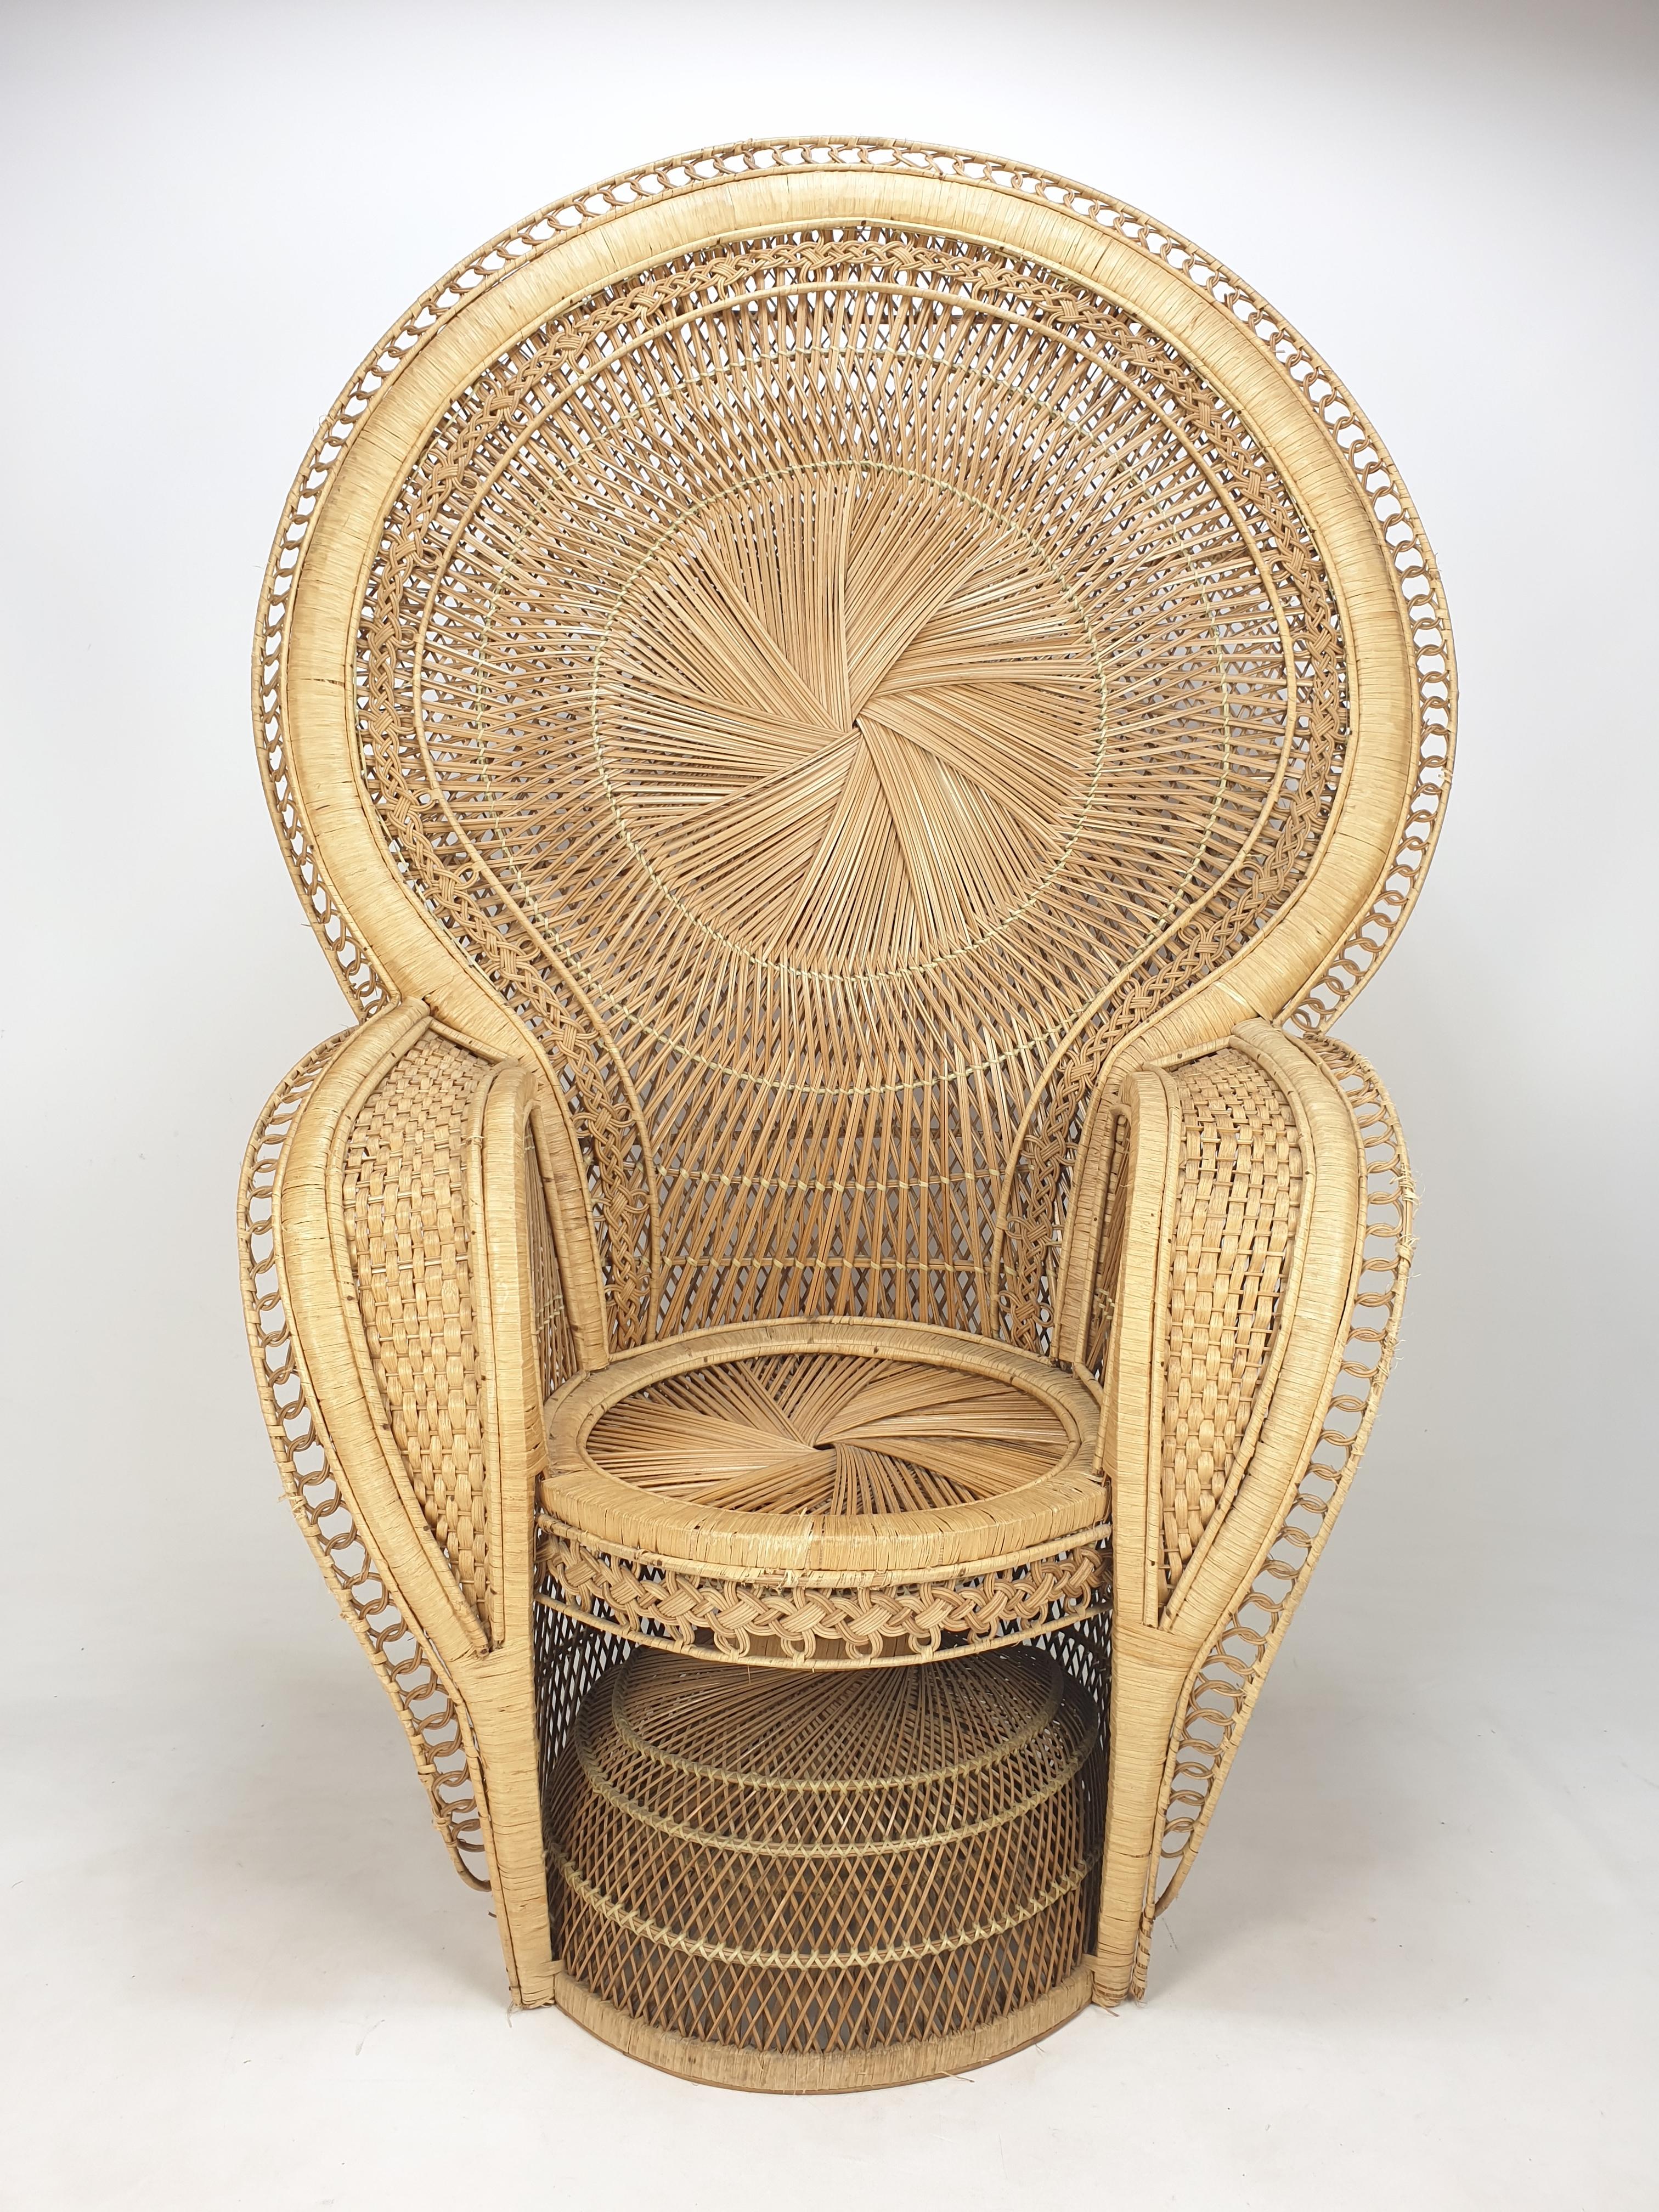 Very huge Emmanuelle or Peacock chair, fabricated in Italy in the 60's.
A beautiful and rare version with very nice details.

This hand woven armchair is made of rattan and wicker.
Very elegant shapes made with the ultimate handcraft. 

The